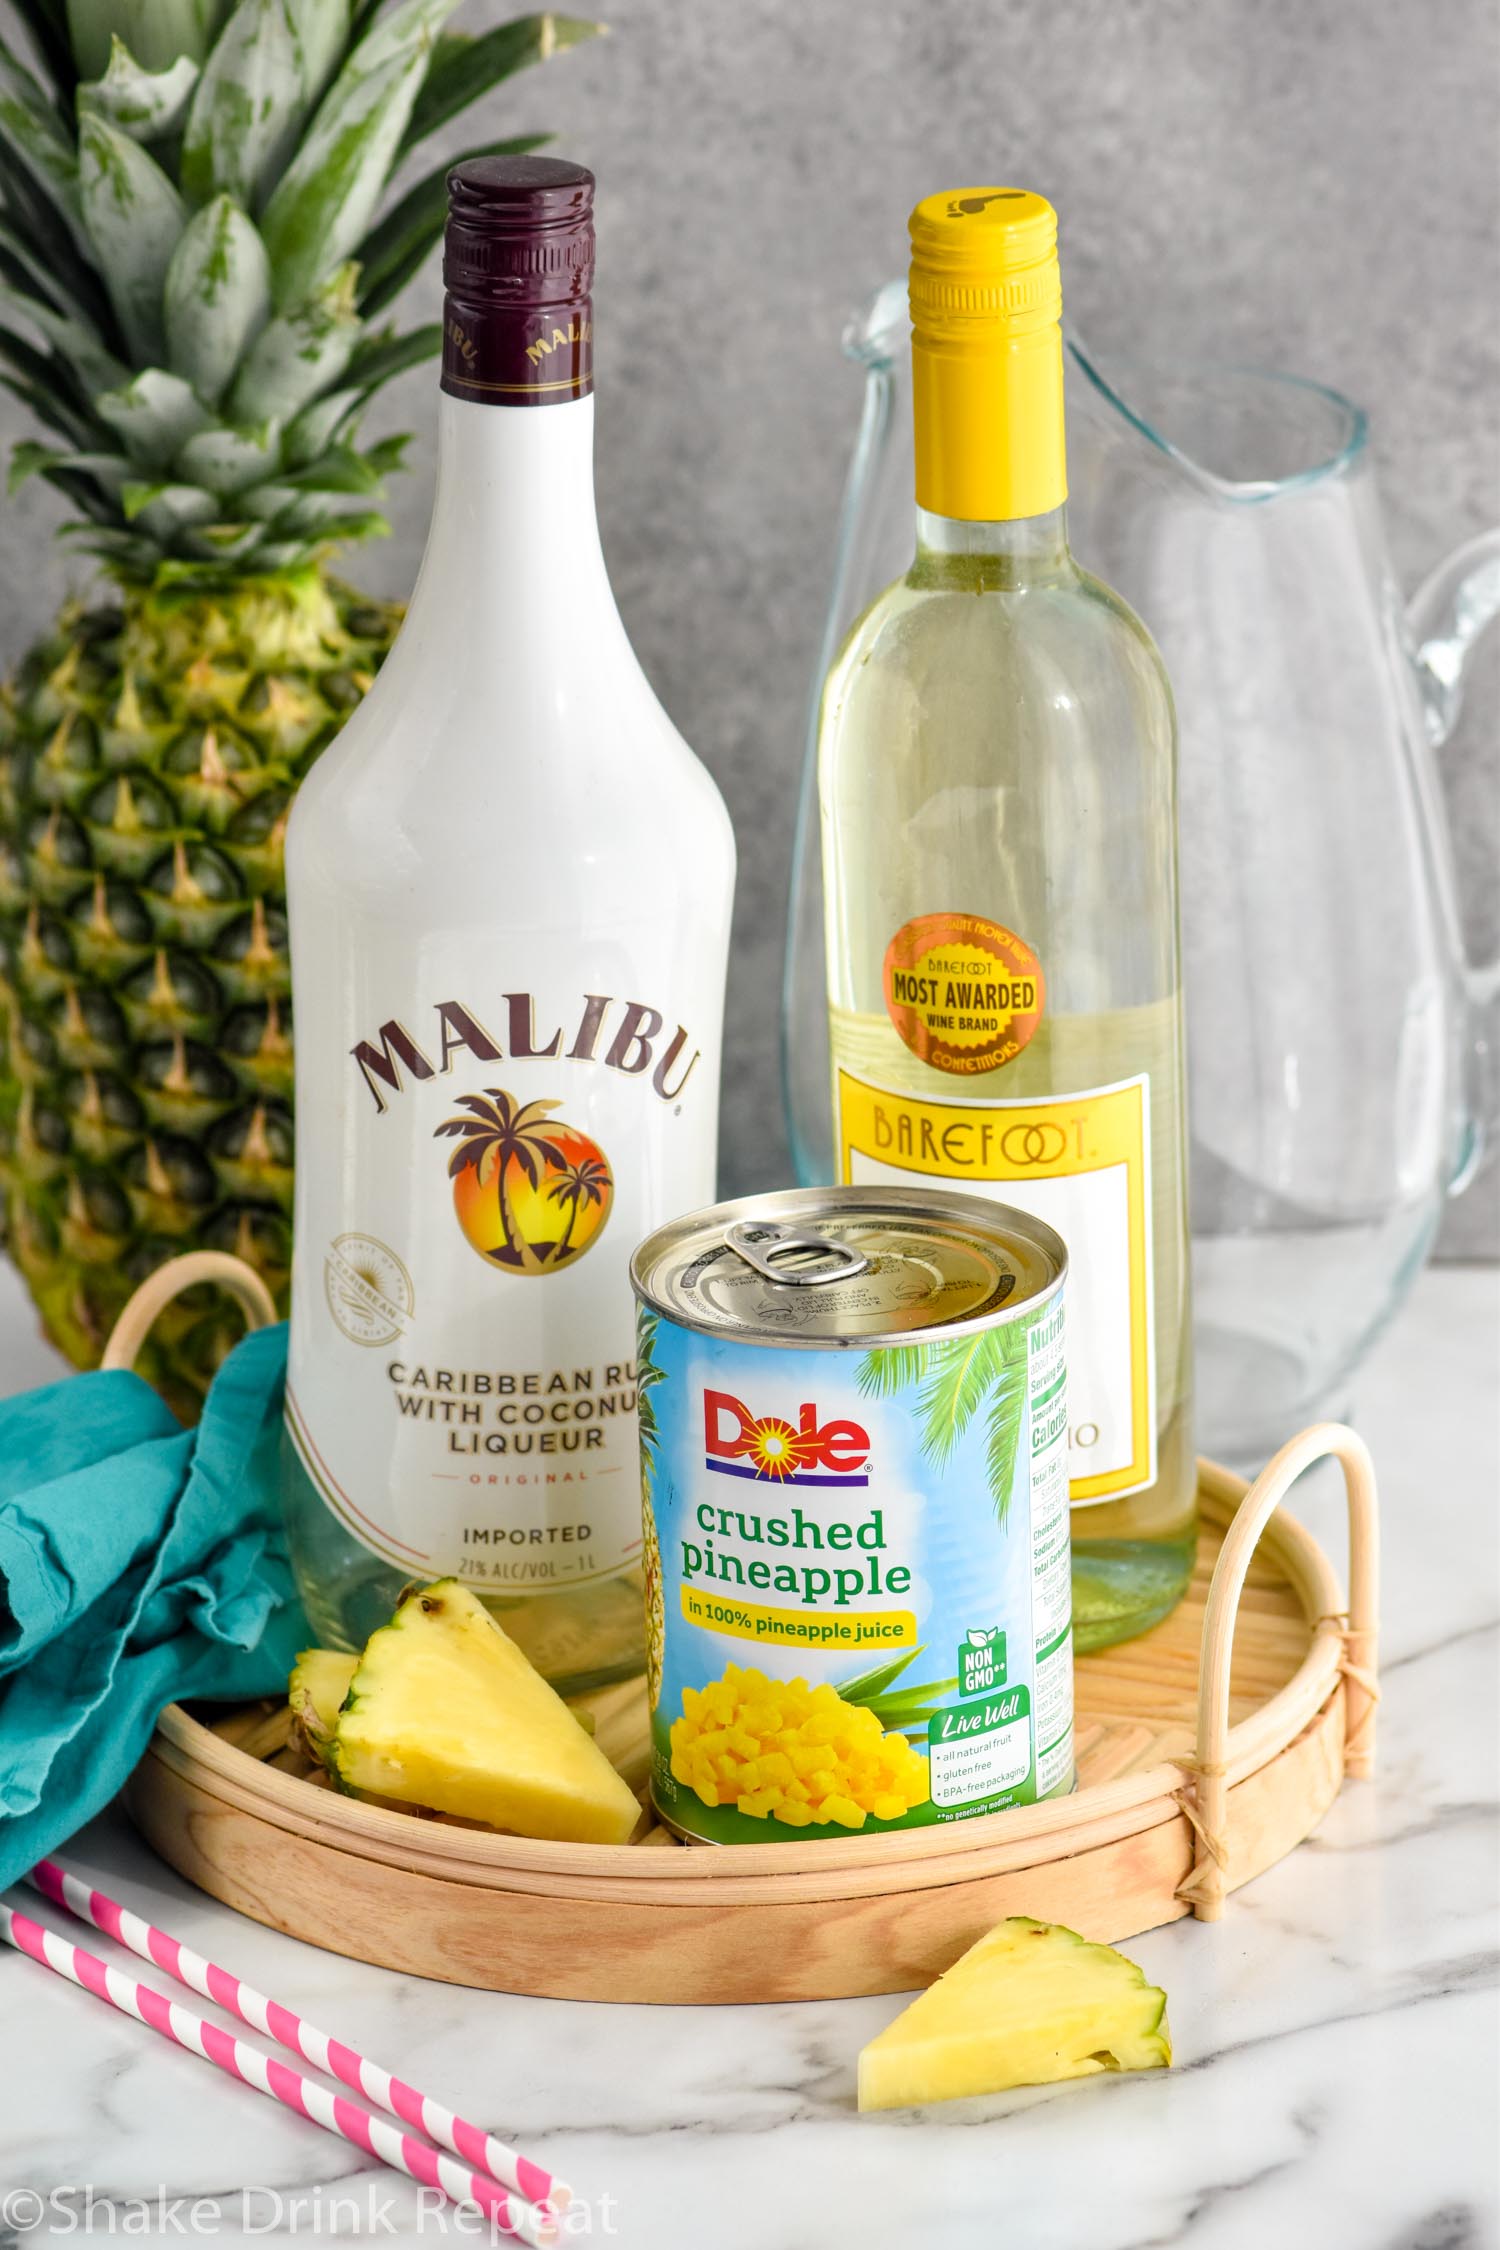 Bottle of Malibu rum, Moscato wine, and a can of crushed pineapple on platter for Pina Colada Sangria recipe. Glass pitcher and a pineapple in the background.